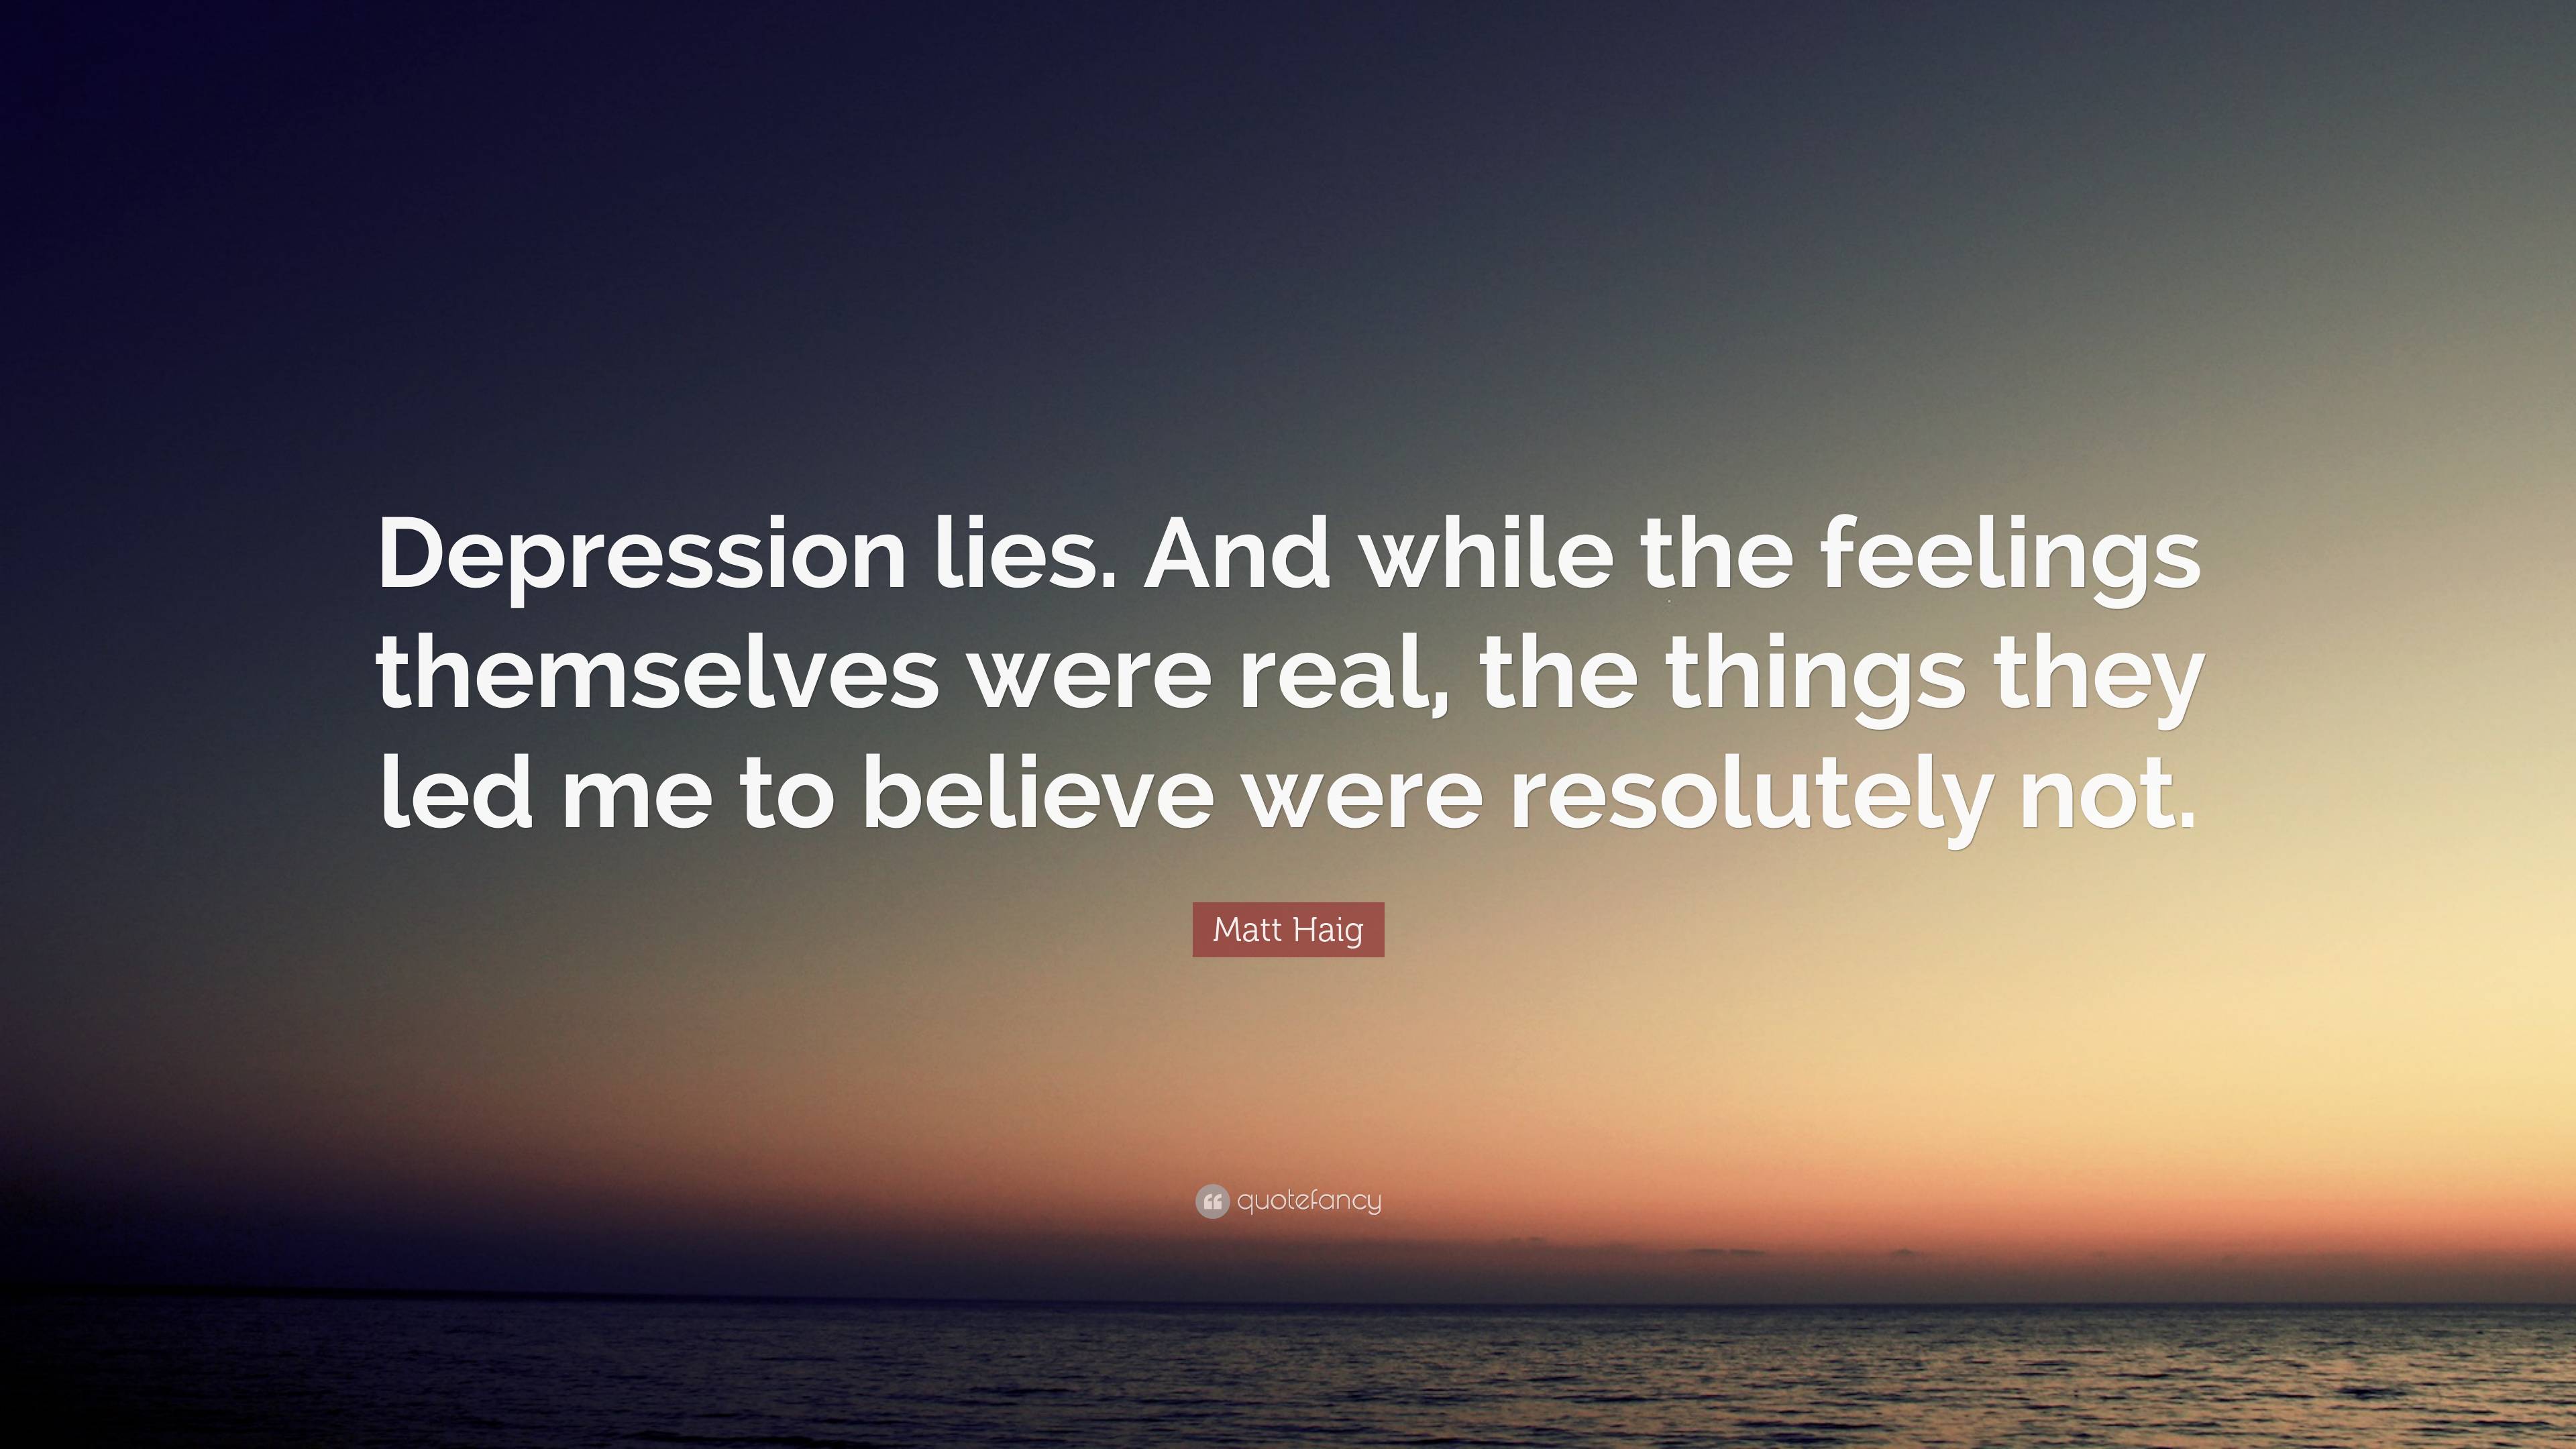 Matt Haig Quote: “Depression lies. And while the feelings themselves ...